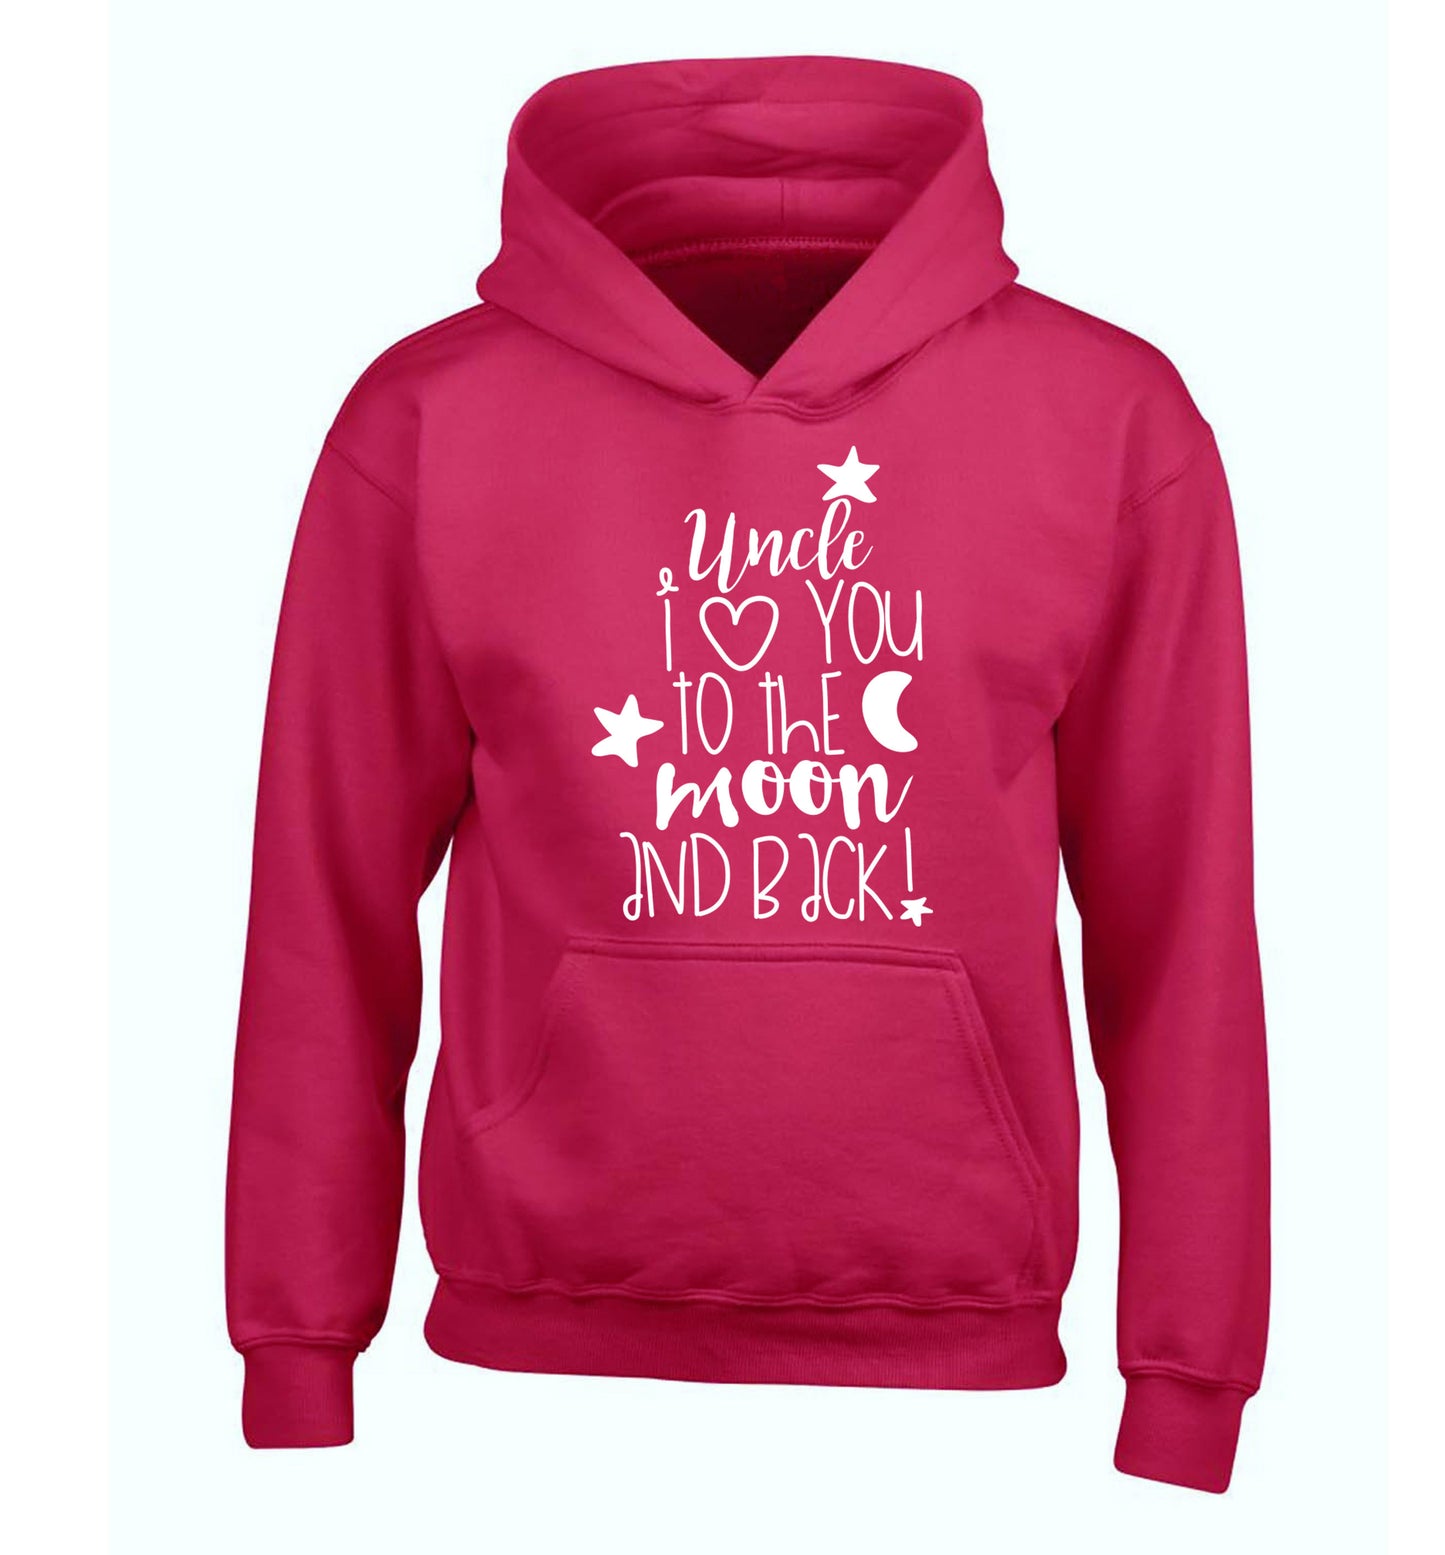 Uncle I love you to the moon and back children's pink hoodie 12-14 Years